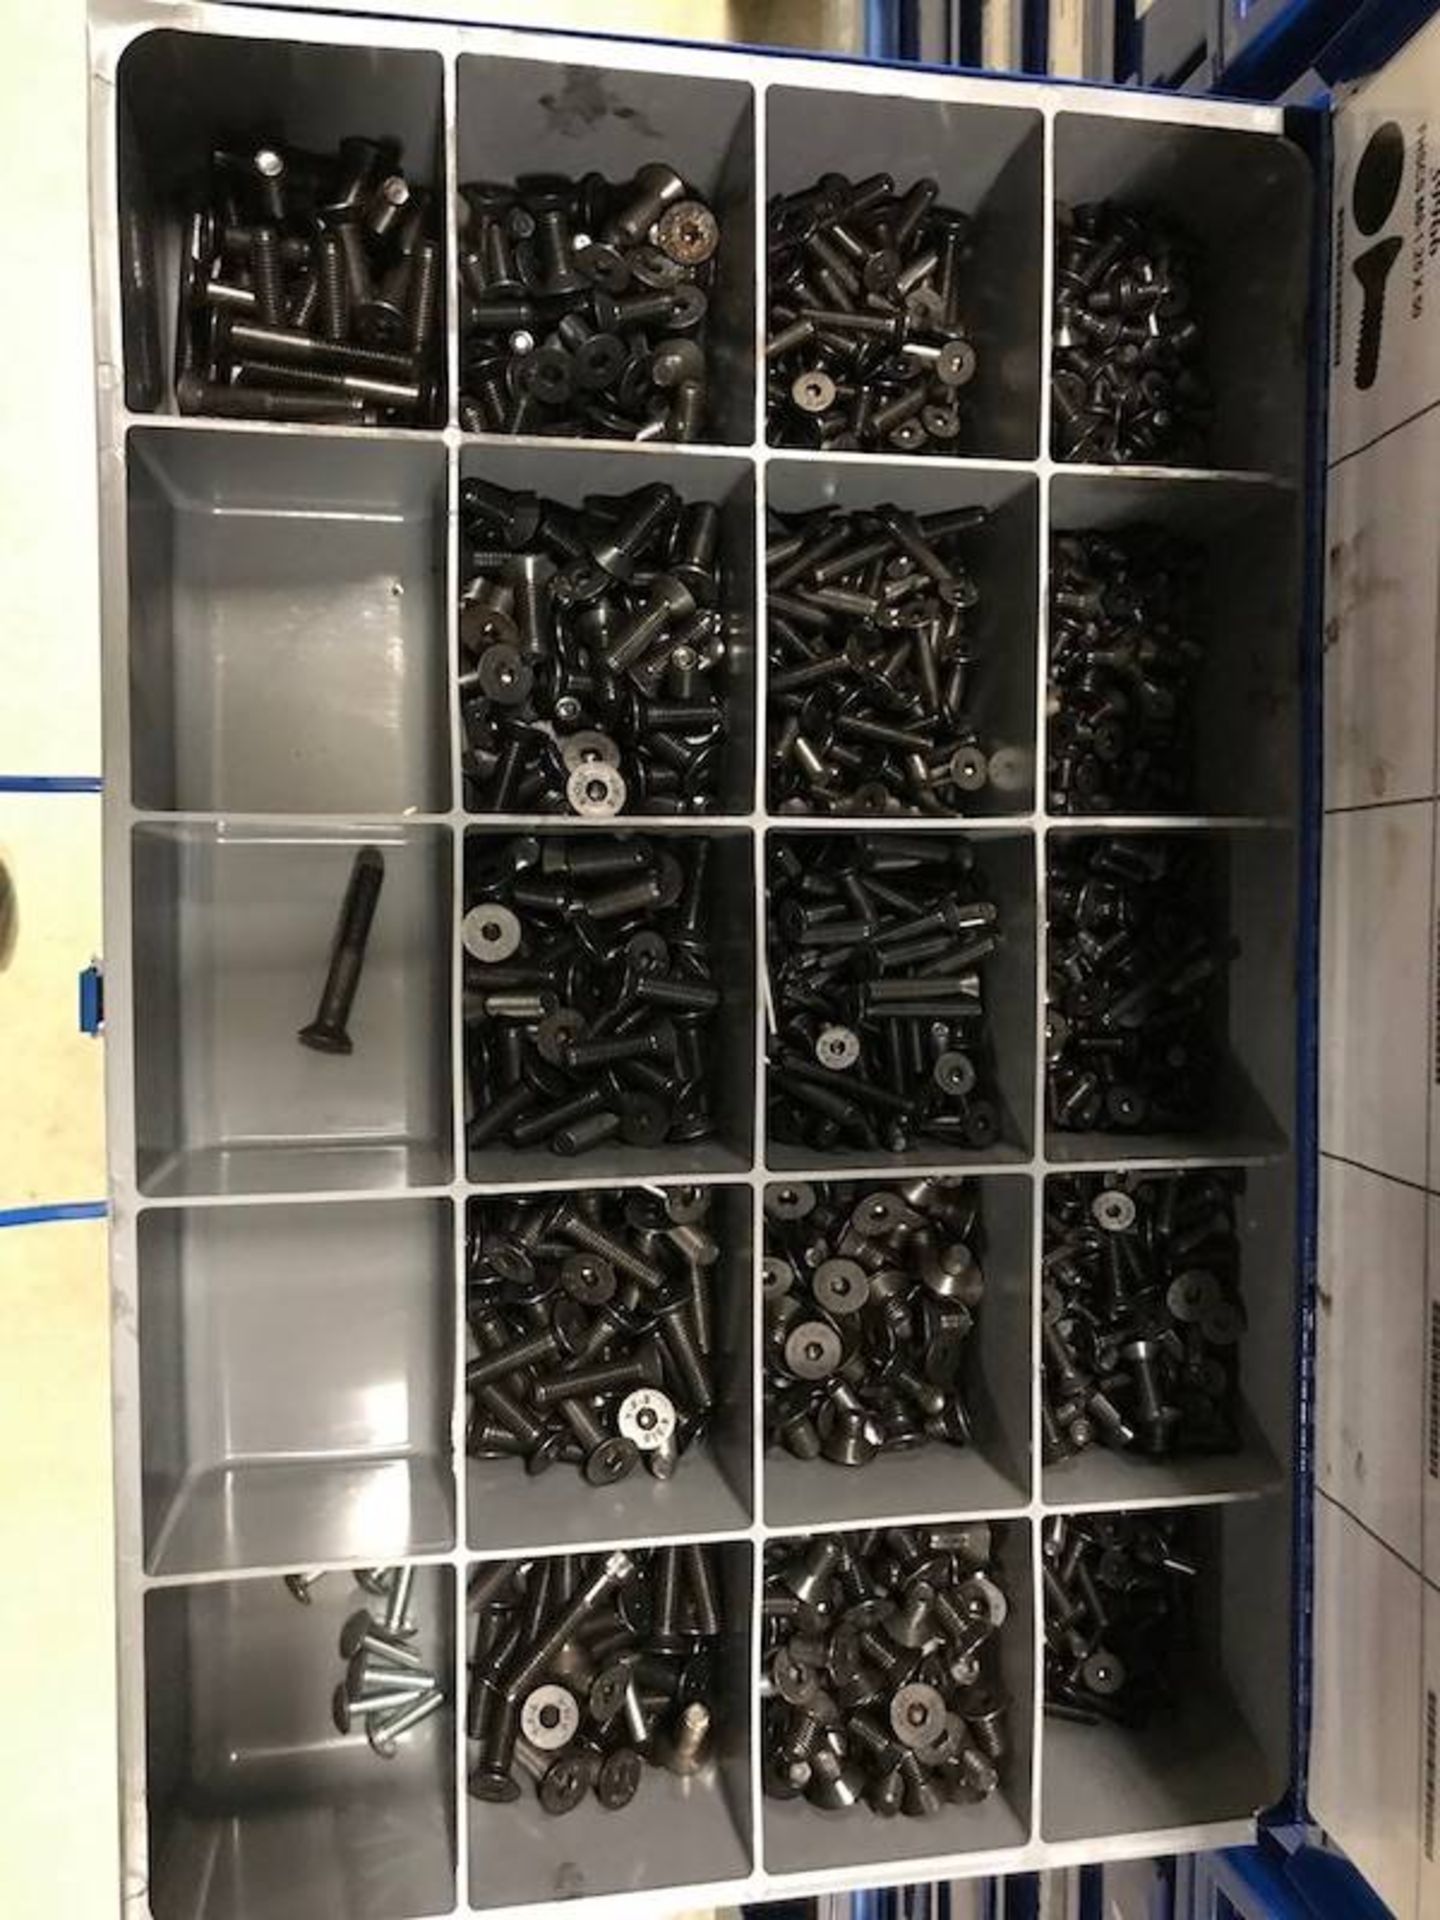 Contents of Fastenal Parts Bins - Image 25 of 70